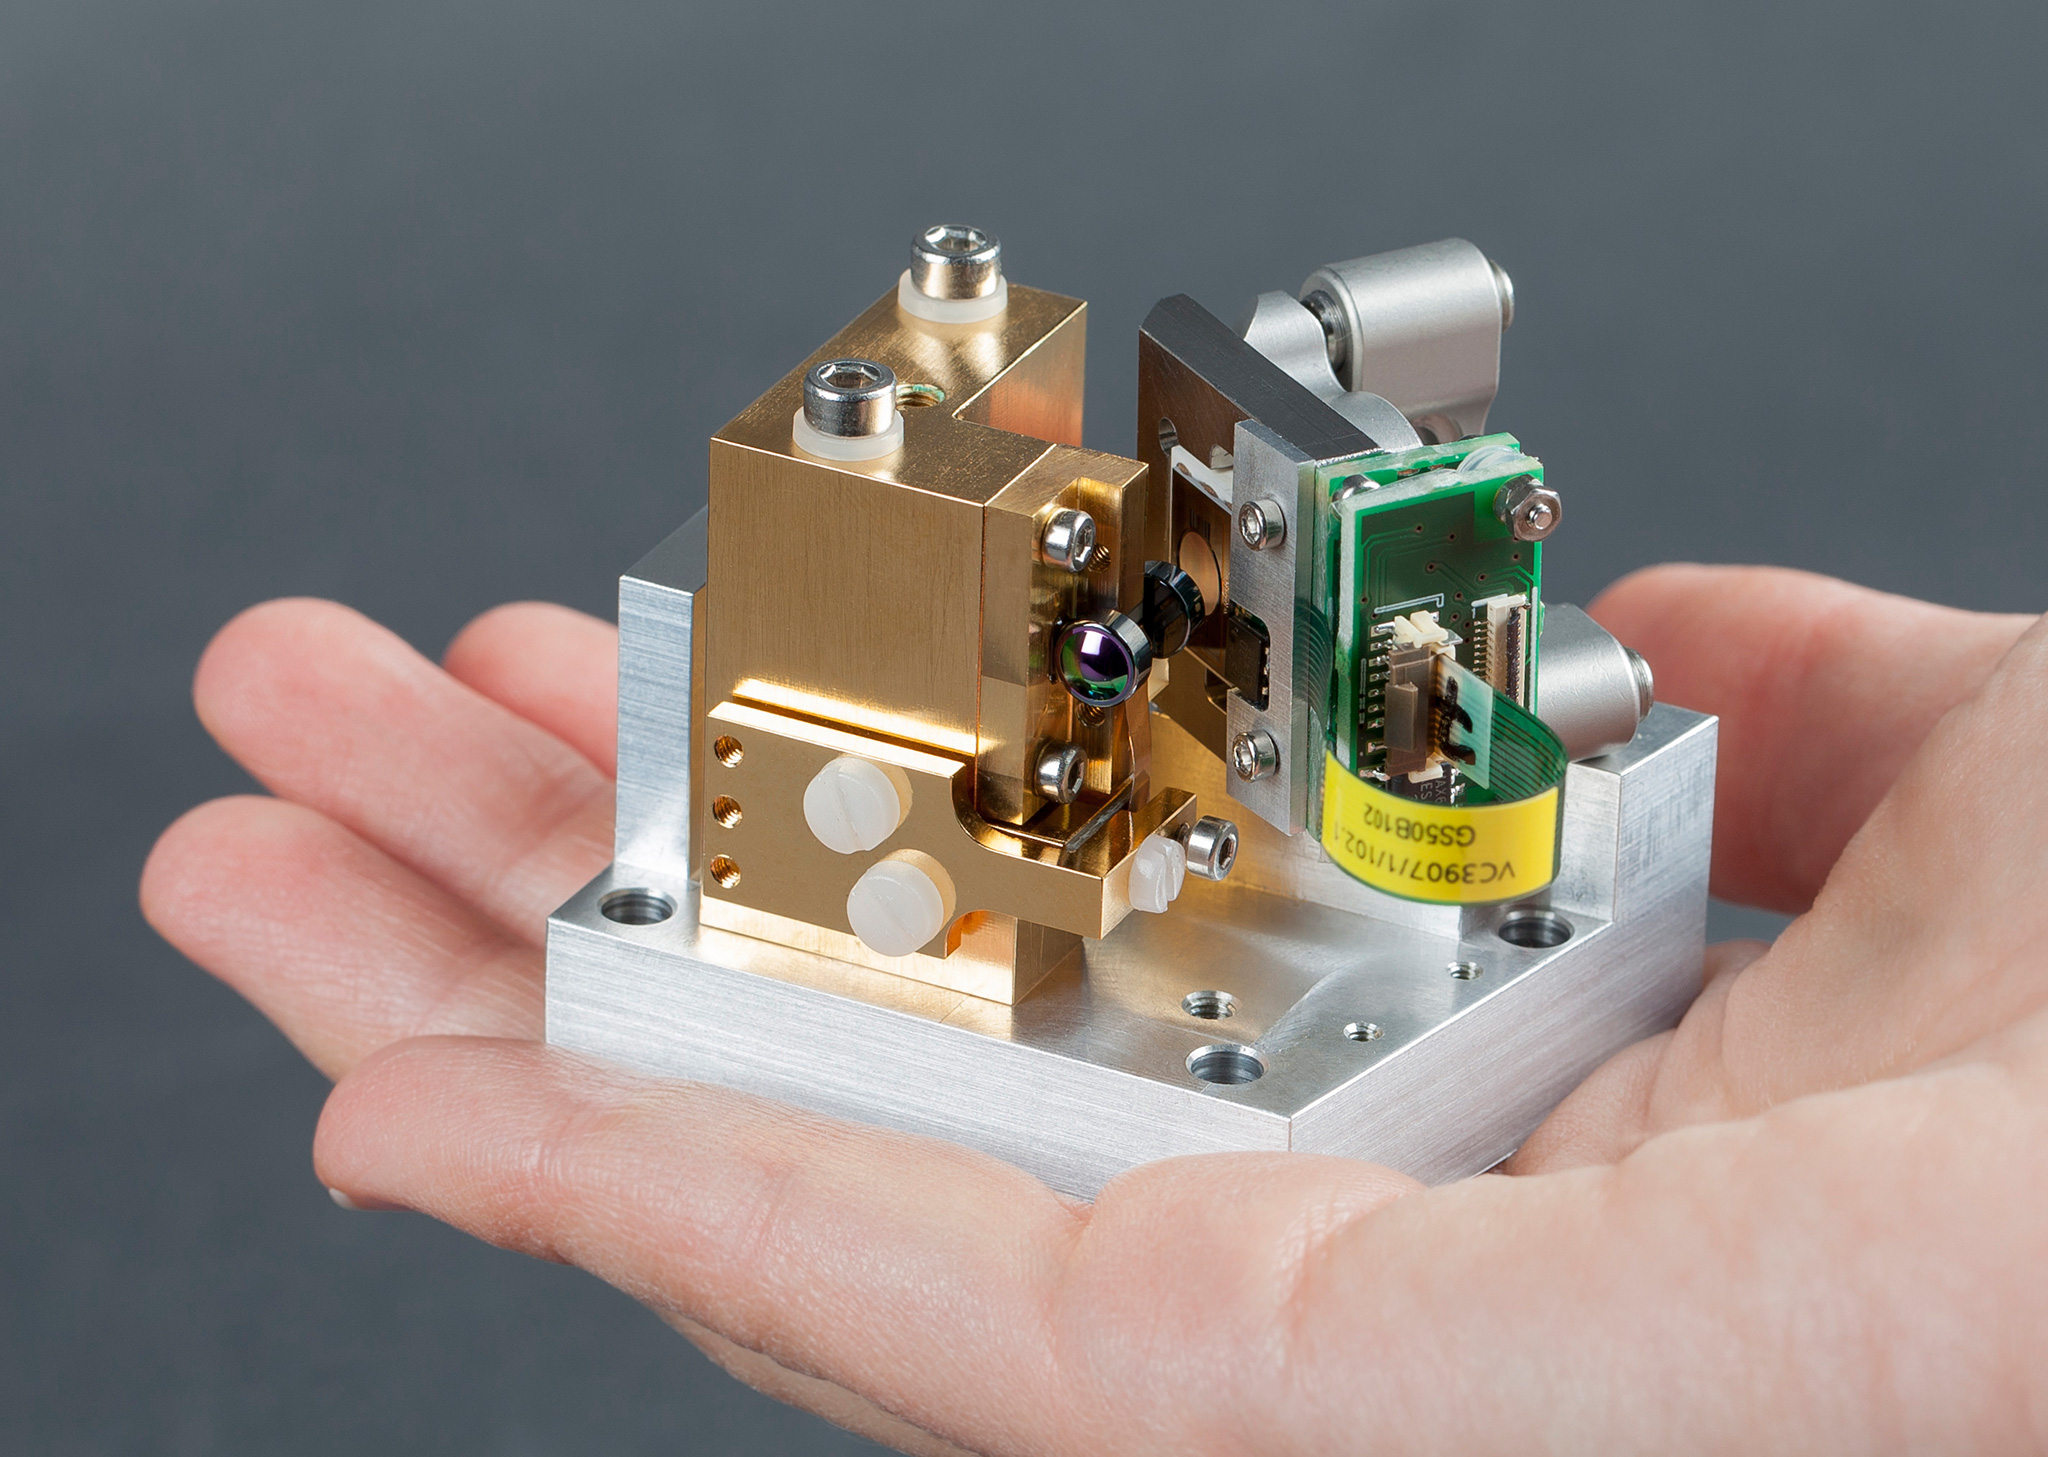 Demonstrator of the miniaturized laser source consisting of a quantum cascade laser chip and a MOEMS grating scanner.